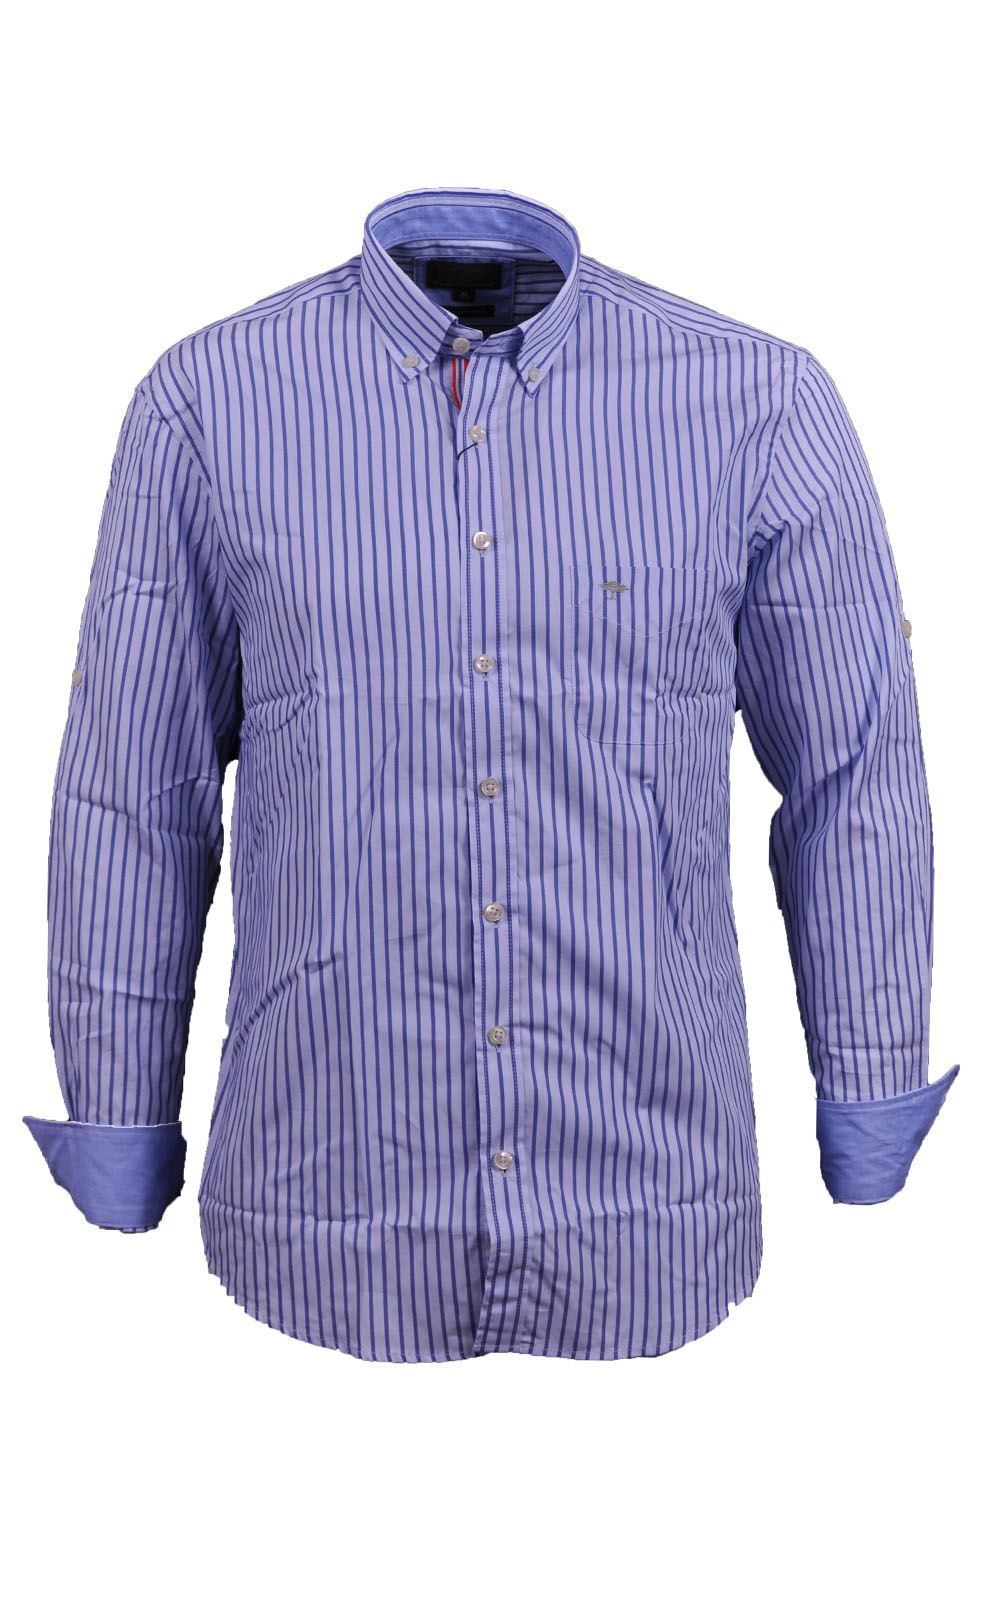 Picture of Fynch Hatton Long Sleeve Shirt 1120-8100